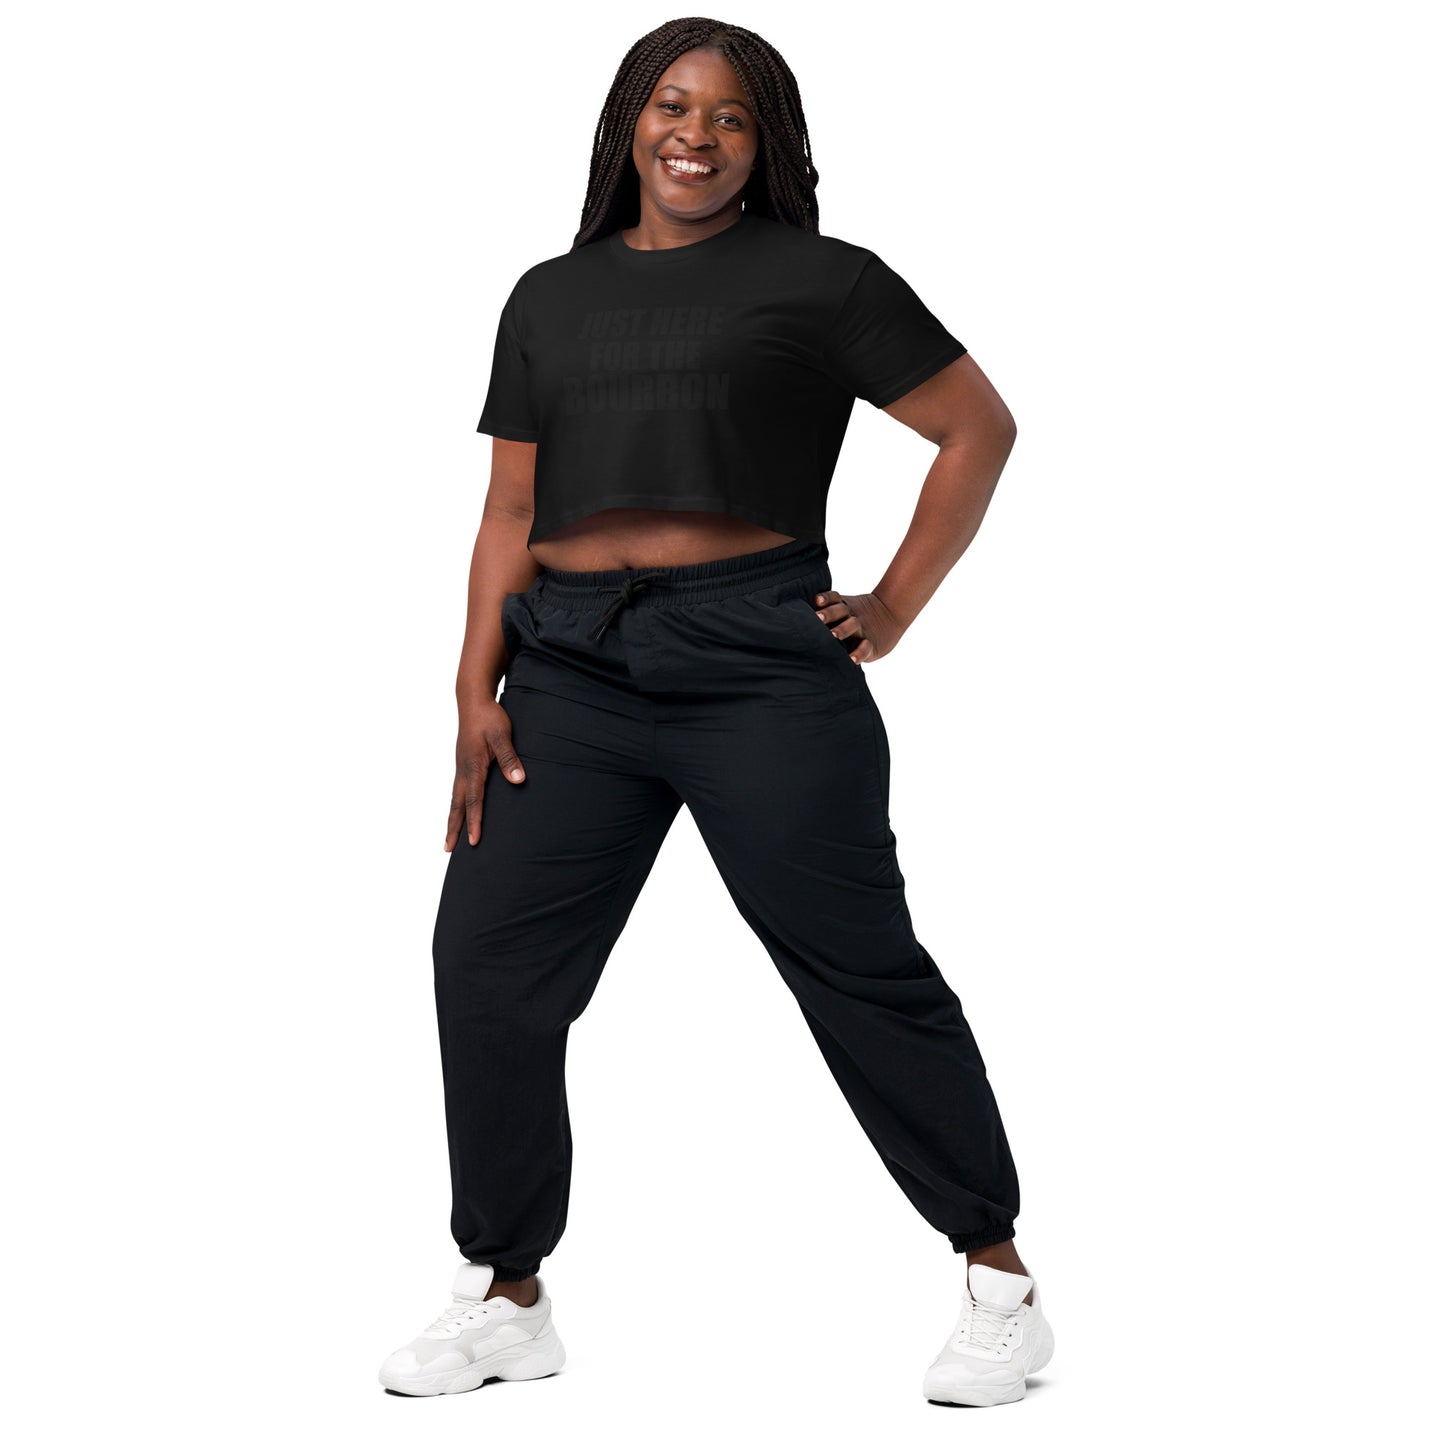 JUST HERE FOR THE BOURBON / AND NONE OF YOUR BULLSHIT - Women’s crop top